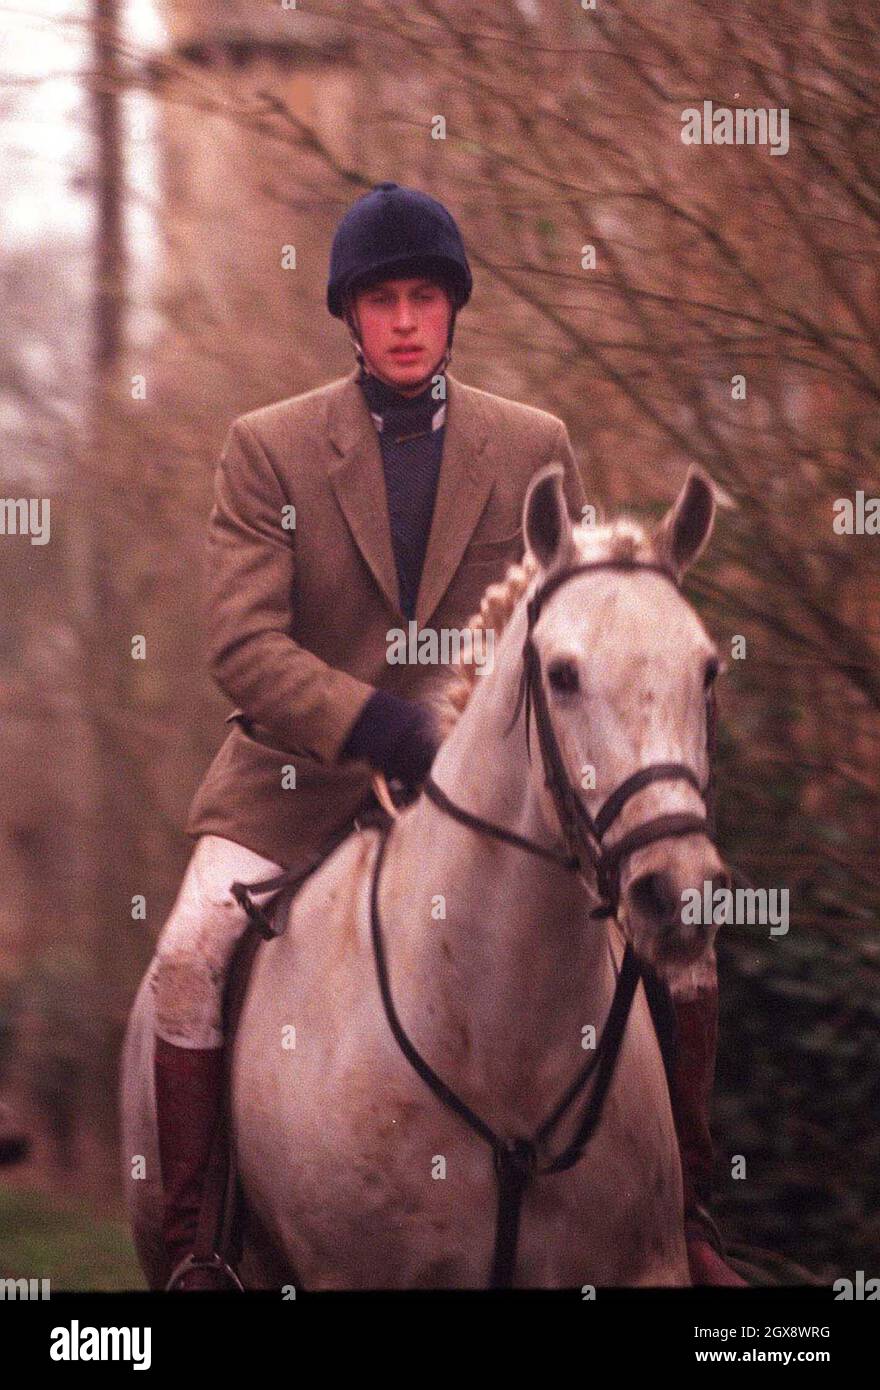 Prince William on the Beaufort hunt in Gloucestershire, England in February 1999.  Photo.  Anwar Hussein  Stock Photo